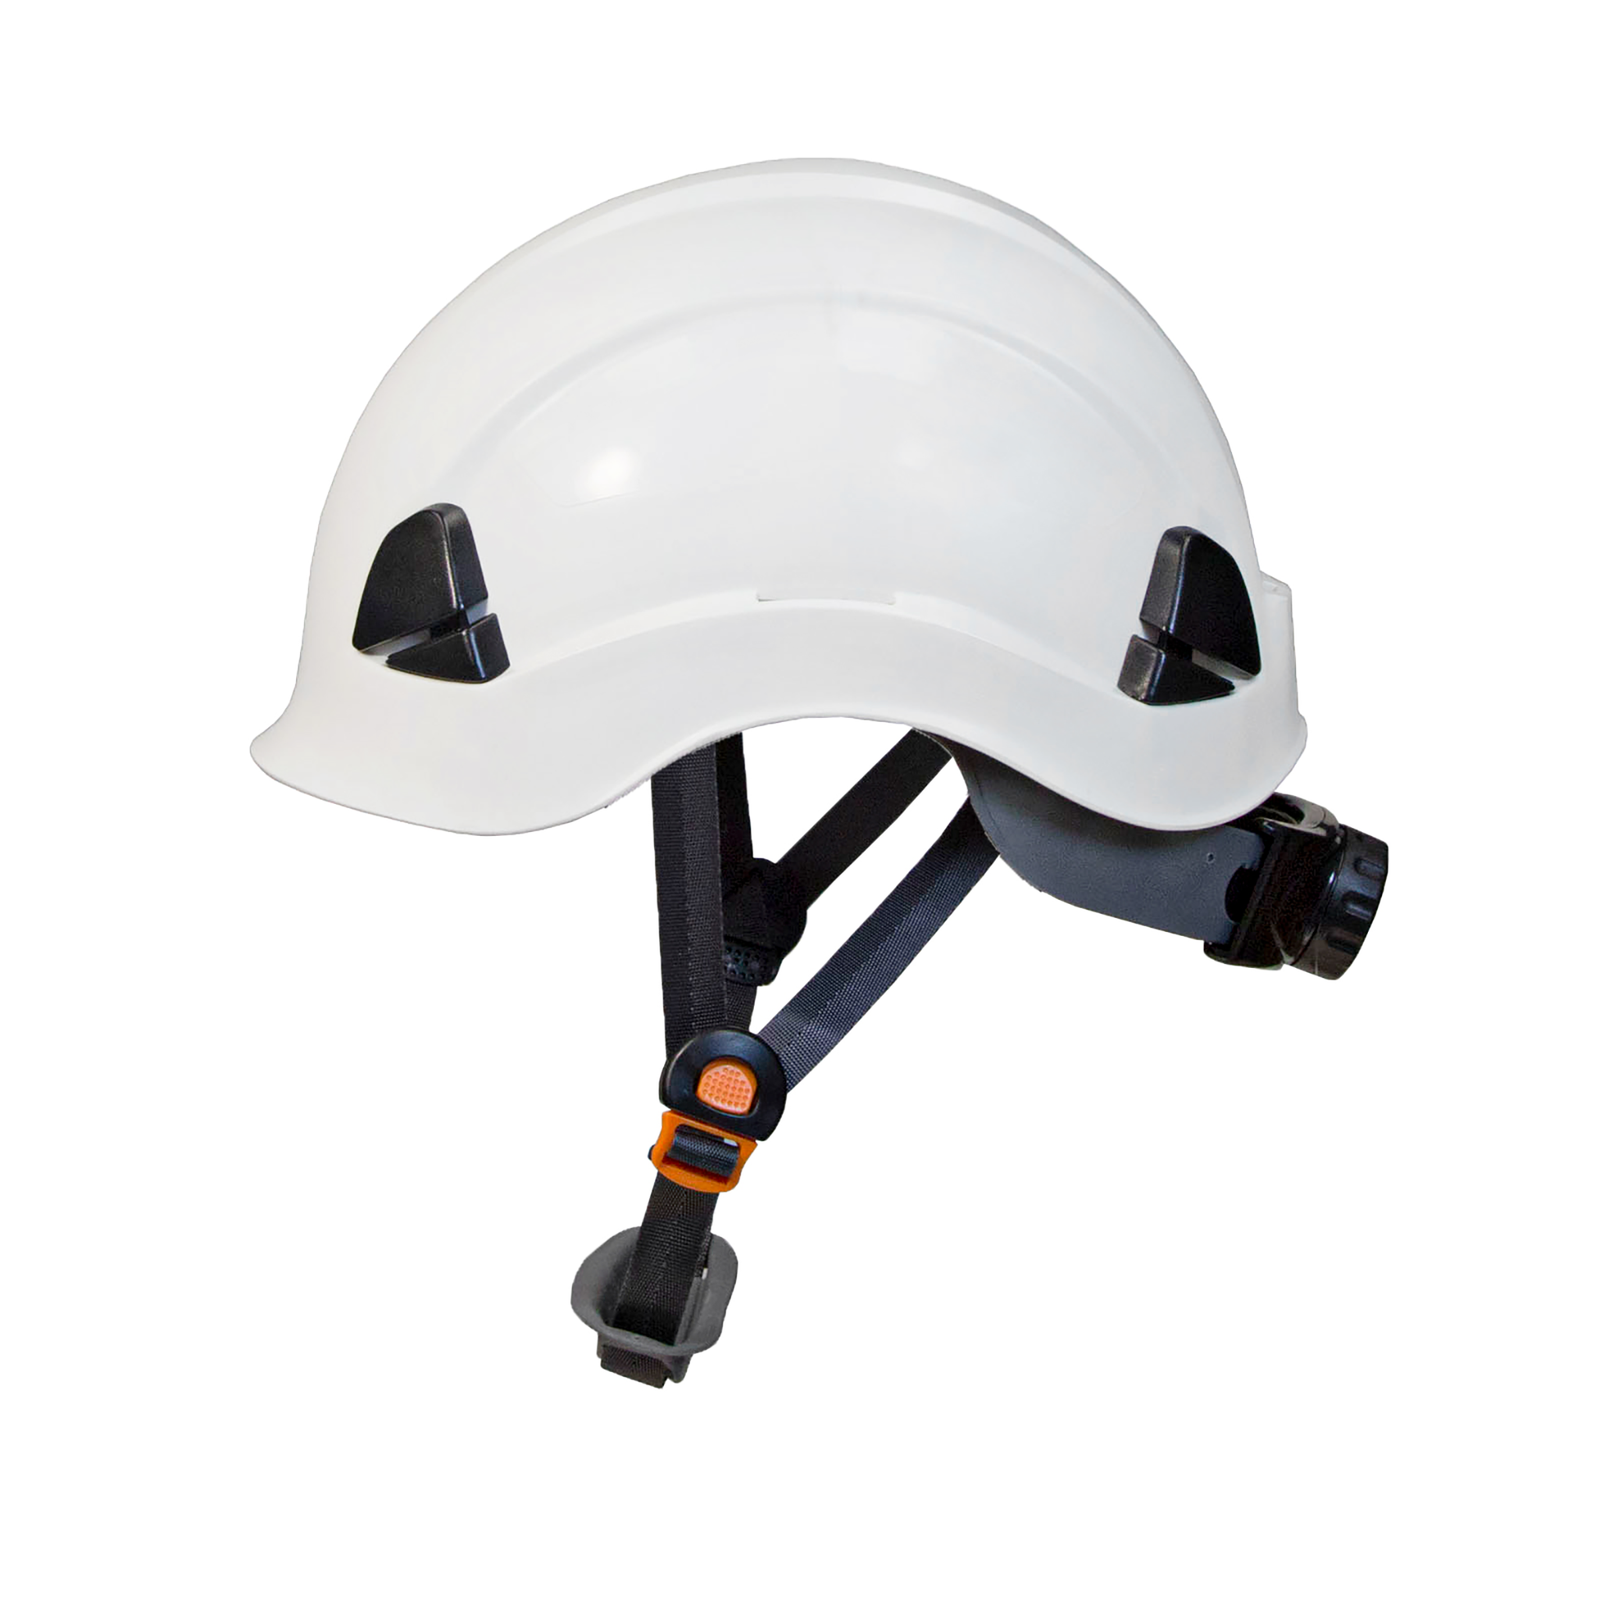 Side view image of the Jorestech white mountable helmet without the attachments